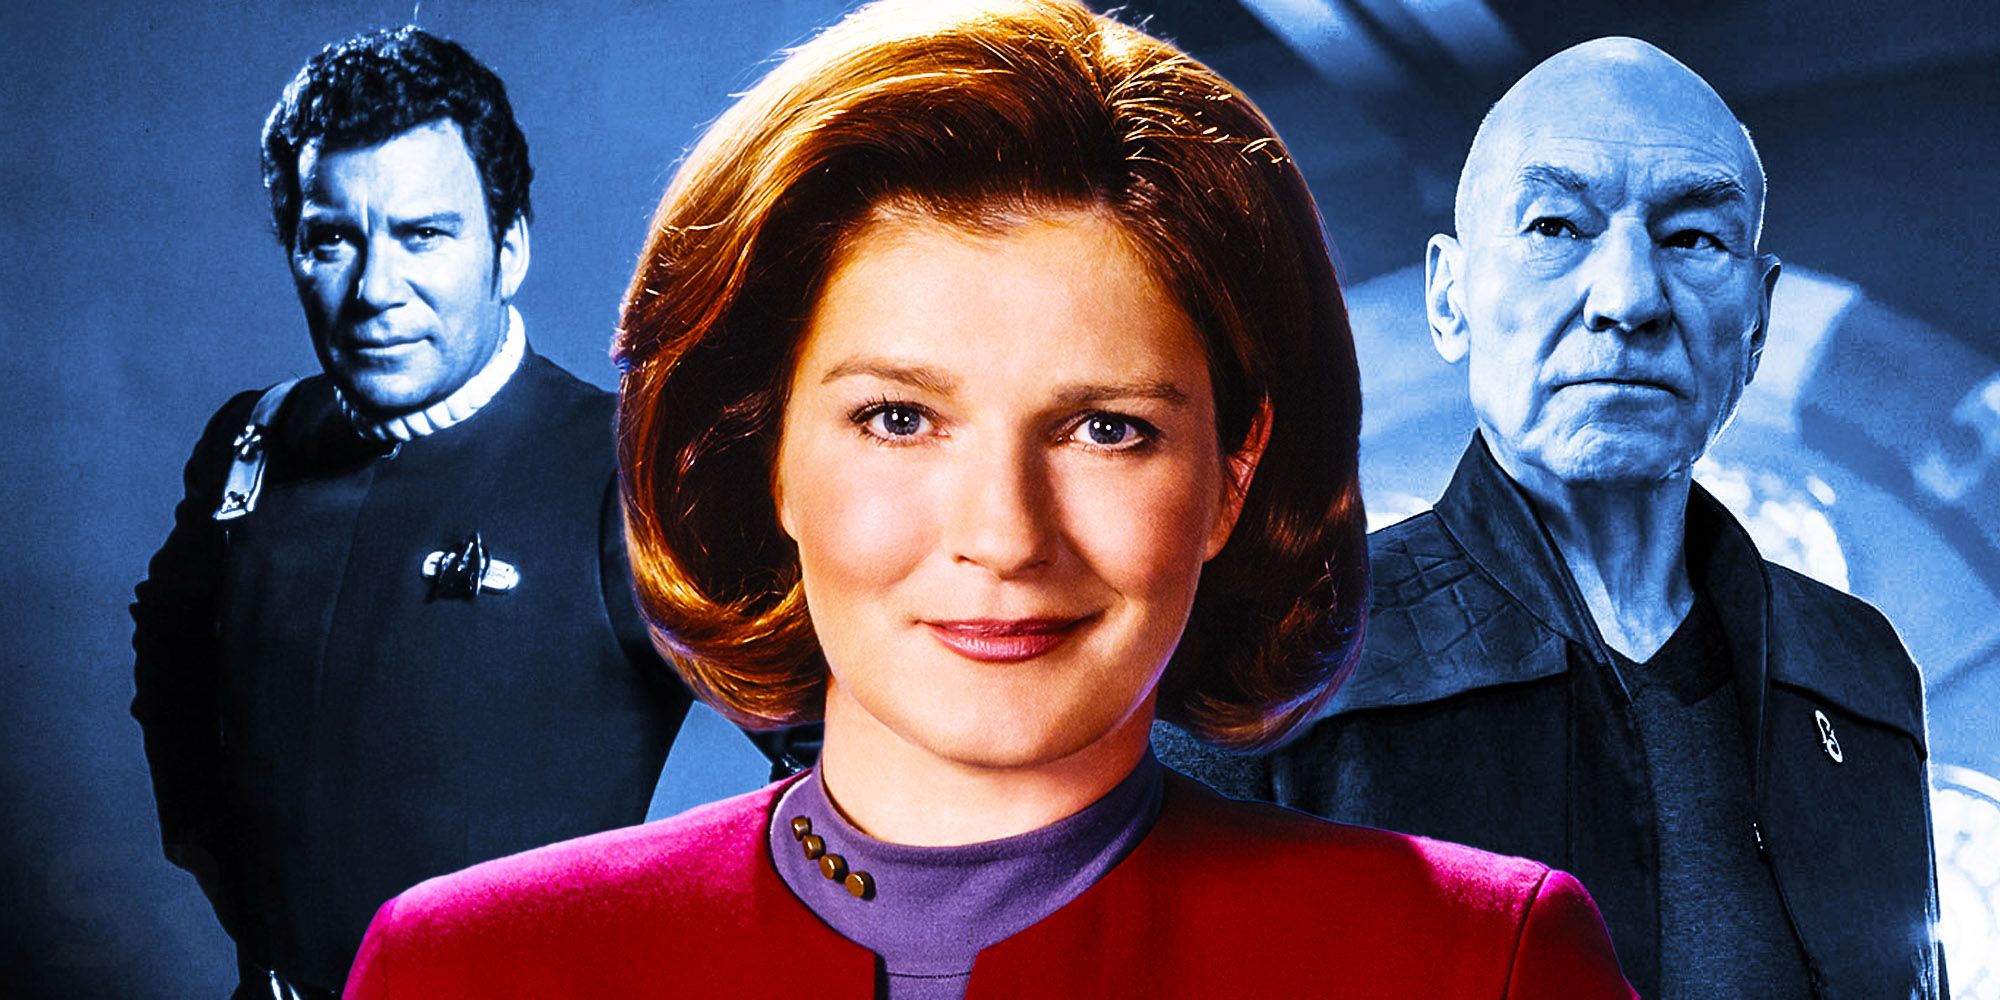 Will Section 31 Want Admiral Janeway’s Body, Too?